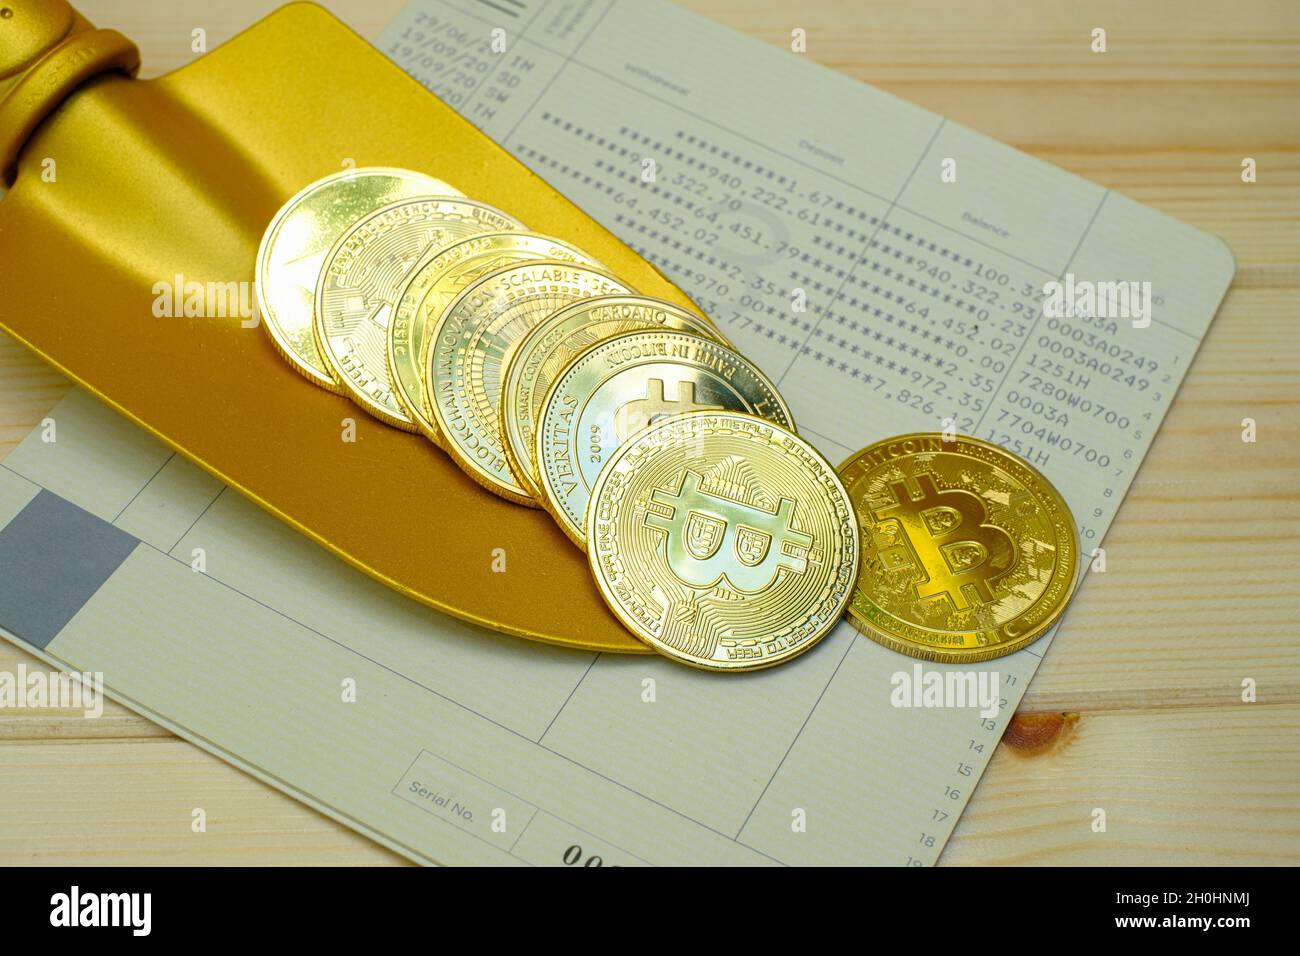 Close up of gold bitcoin coins on bank passbook with a golden shovel on wooden table Stock Photo